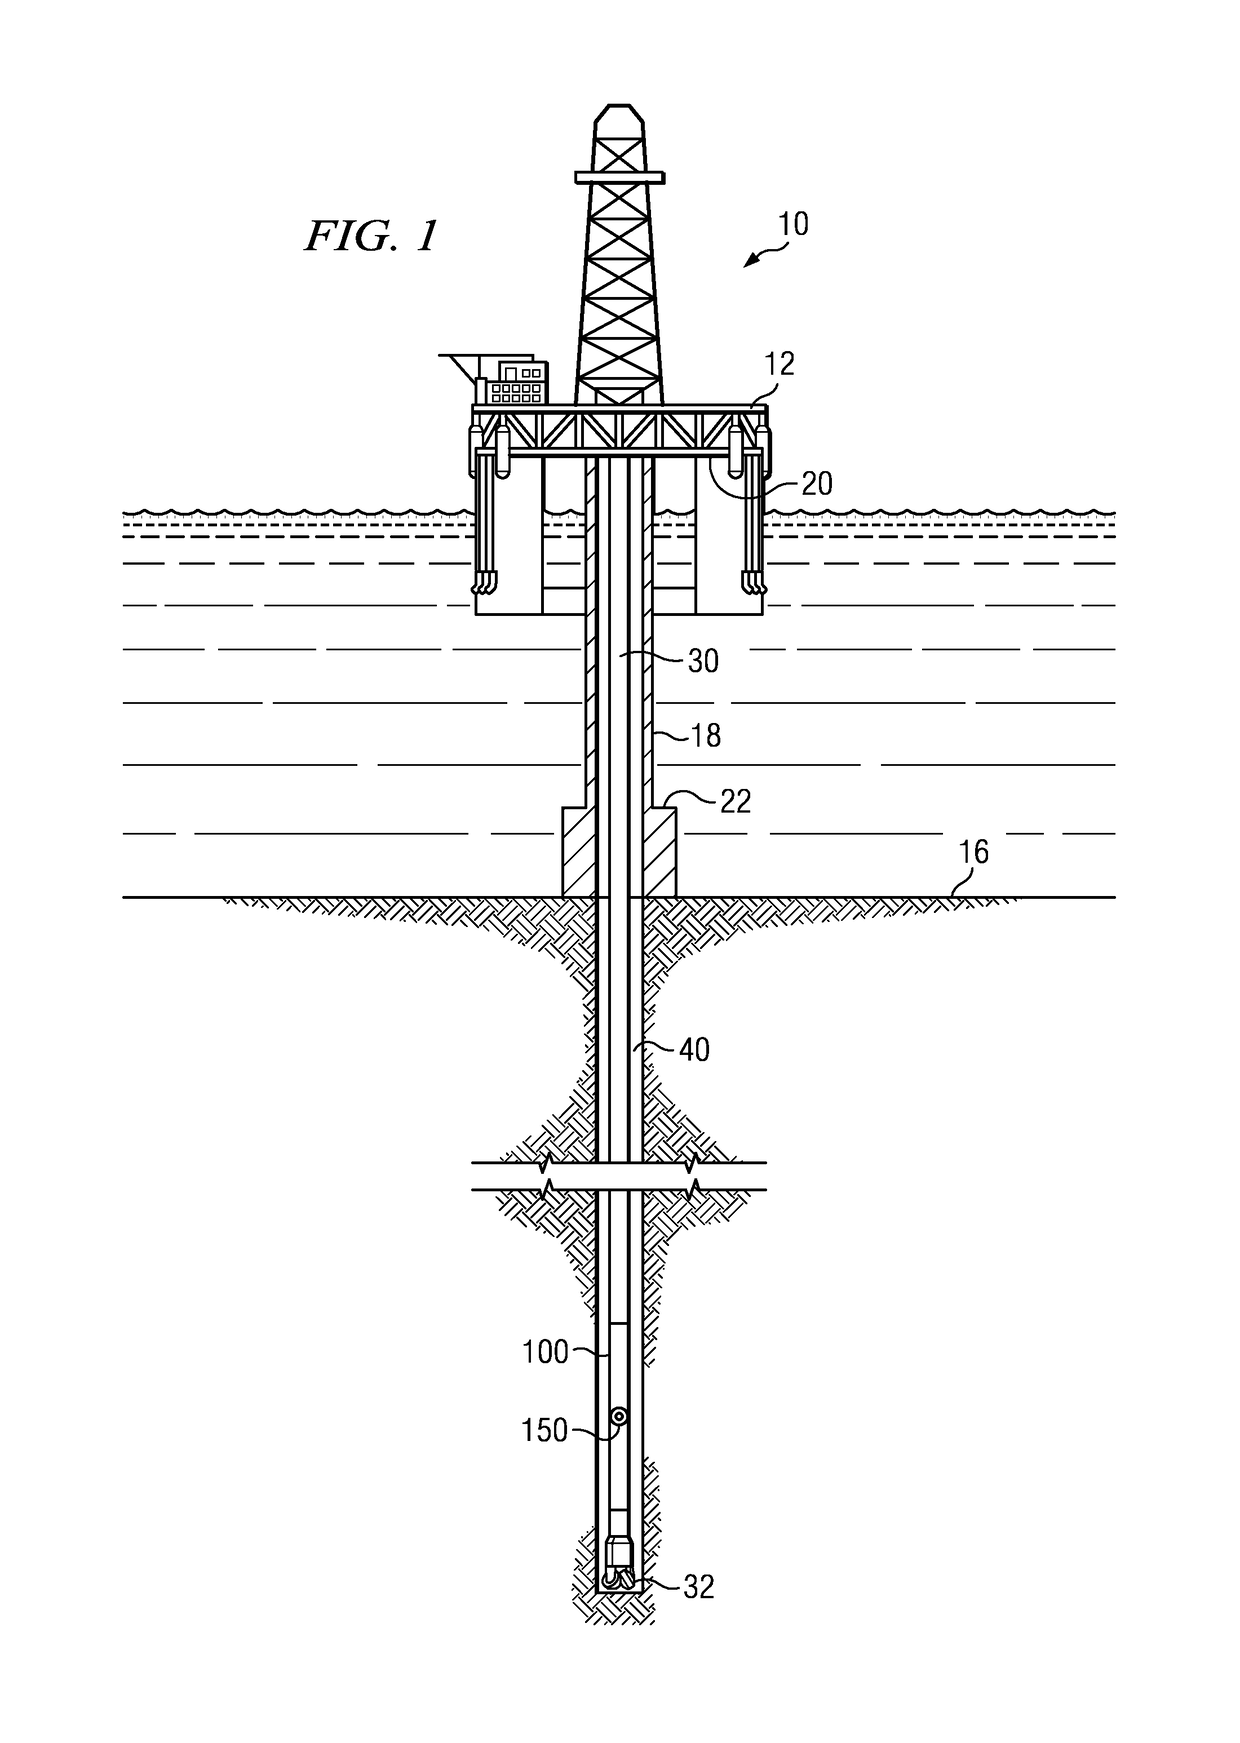 Apparatus and method for microresistivity imaging in which transmitter coil and receiver coil axes are substantially perpendicular to the longitudinal axis of the tool body